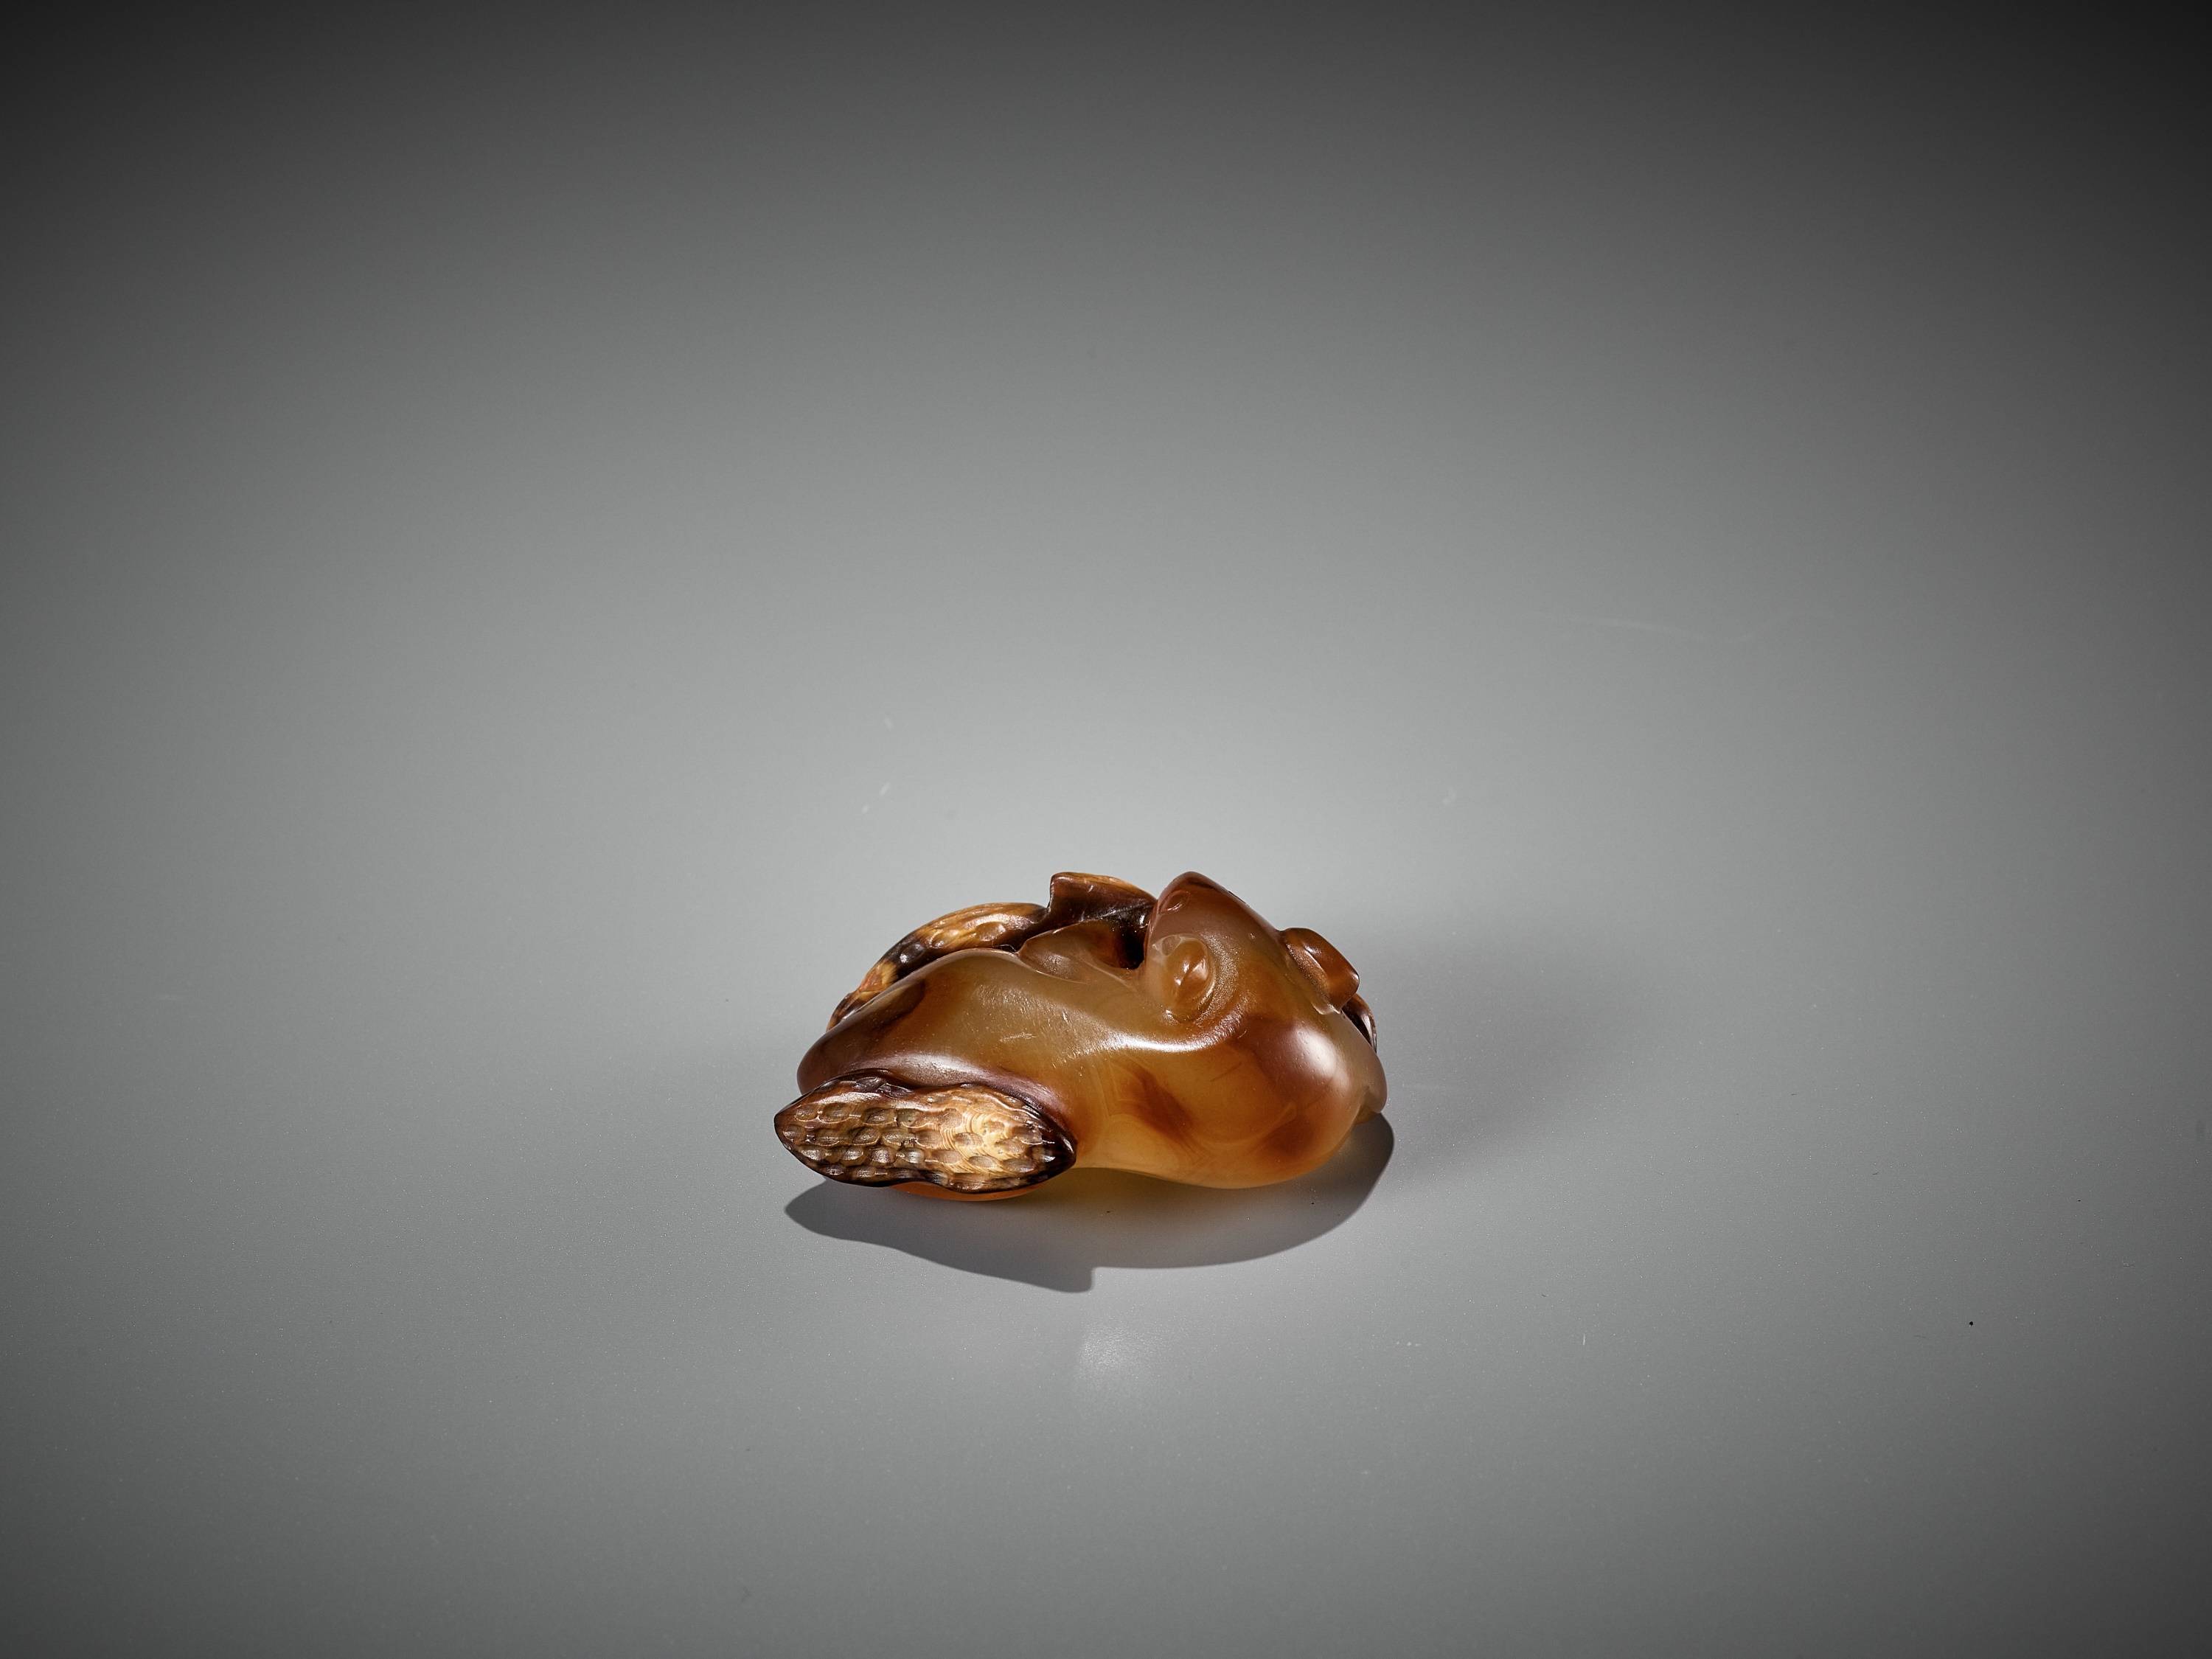 AN AGATE PENDANT OF A SQUIRREL WITH PEANUTS, 18TH-19TH CENTURY - Image 7 of 14